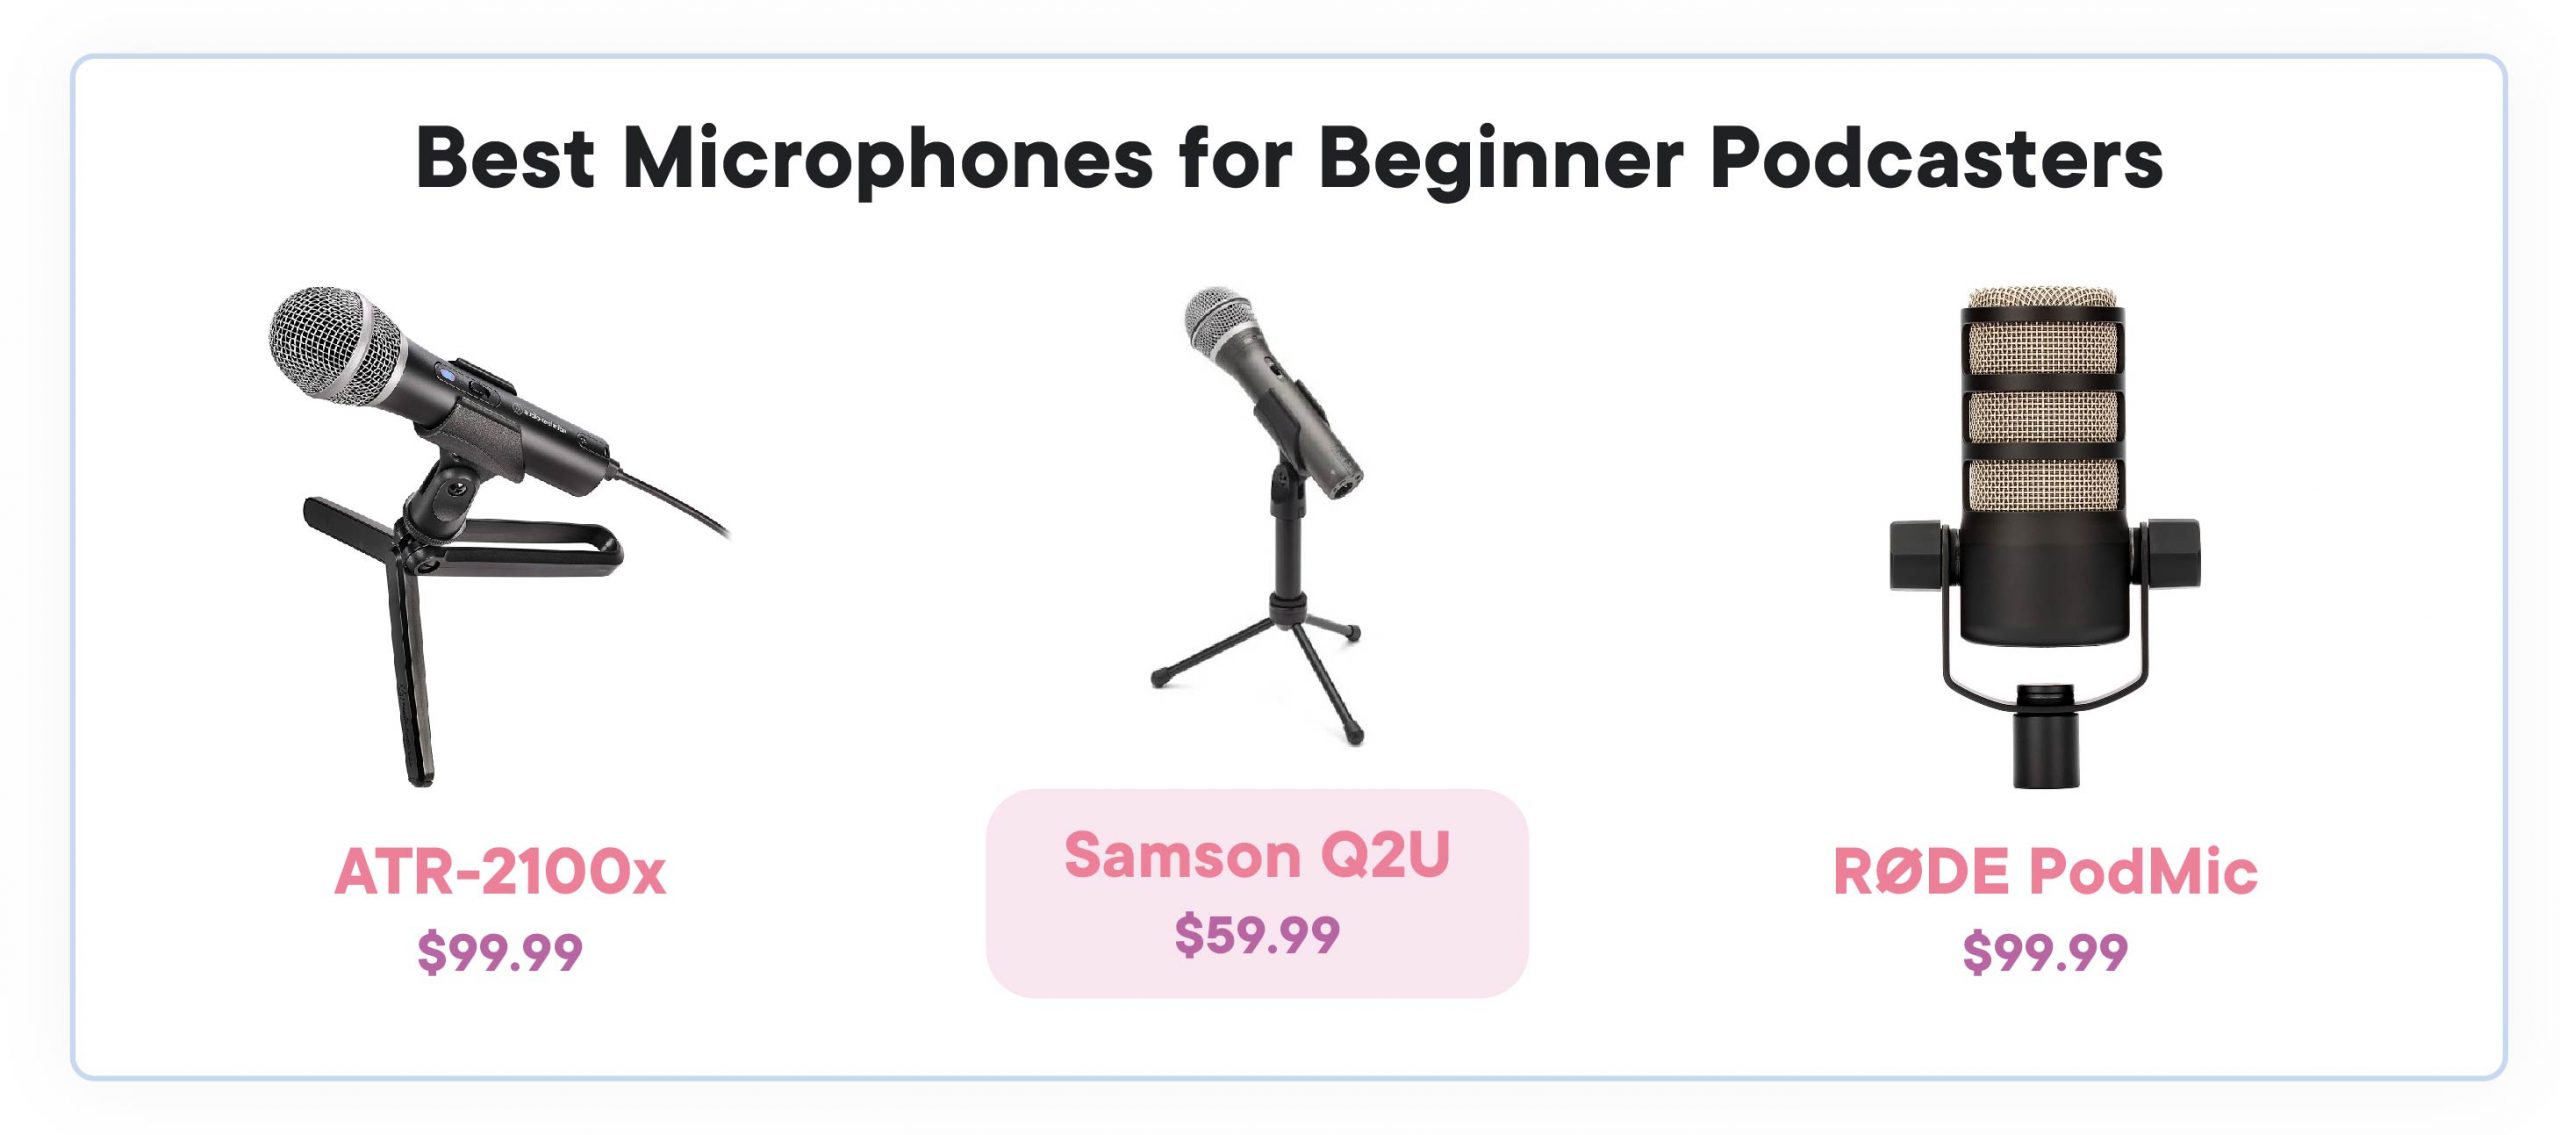 best microphones for podcasters. To the left, the ATR 2100X, in the centre, the Samson Q2U, and to the right, the RODE Podmic.